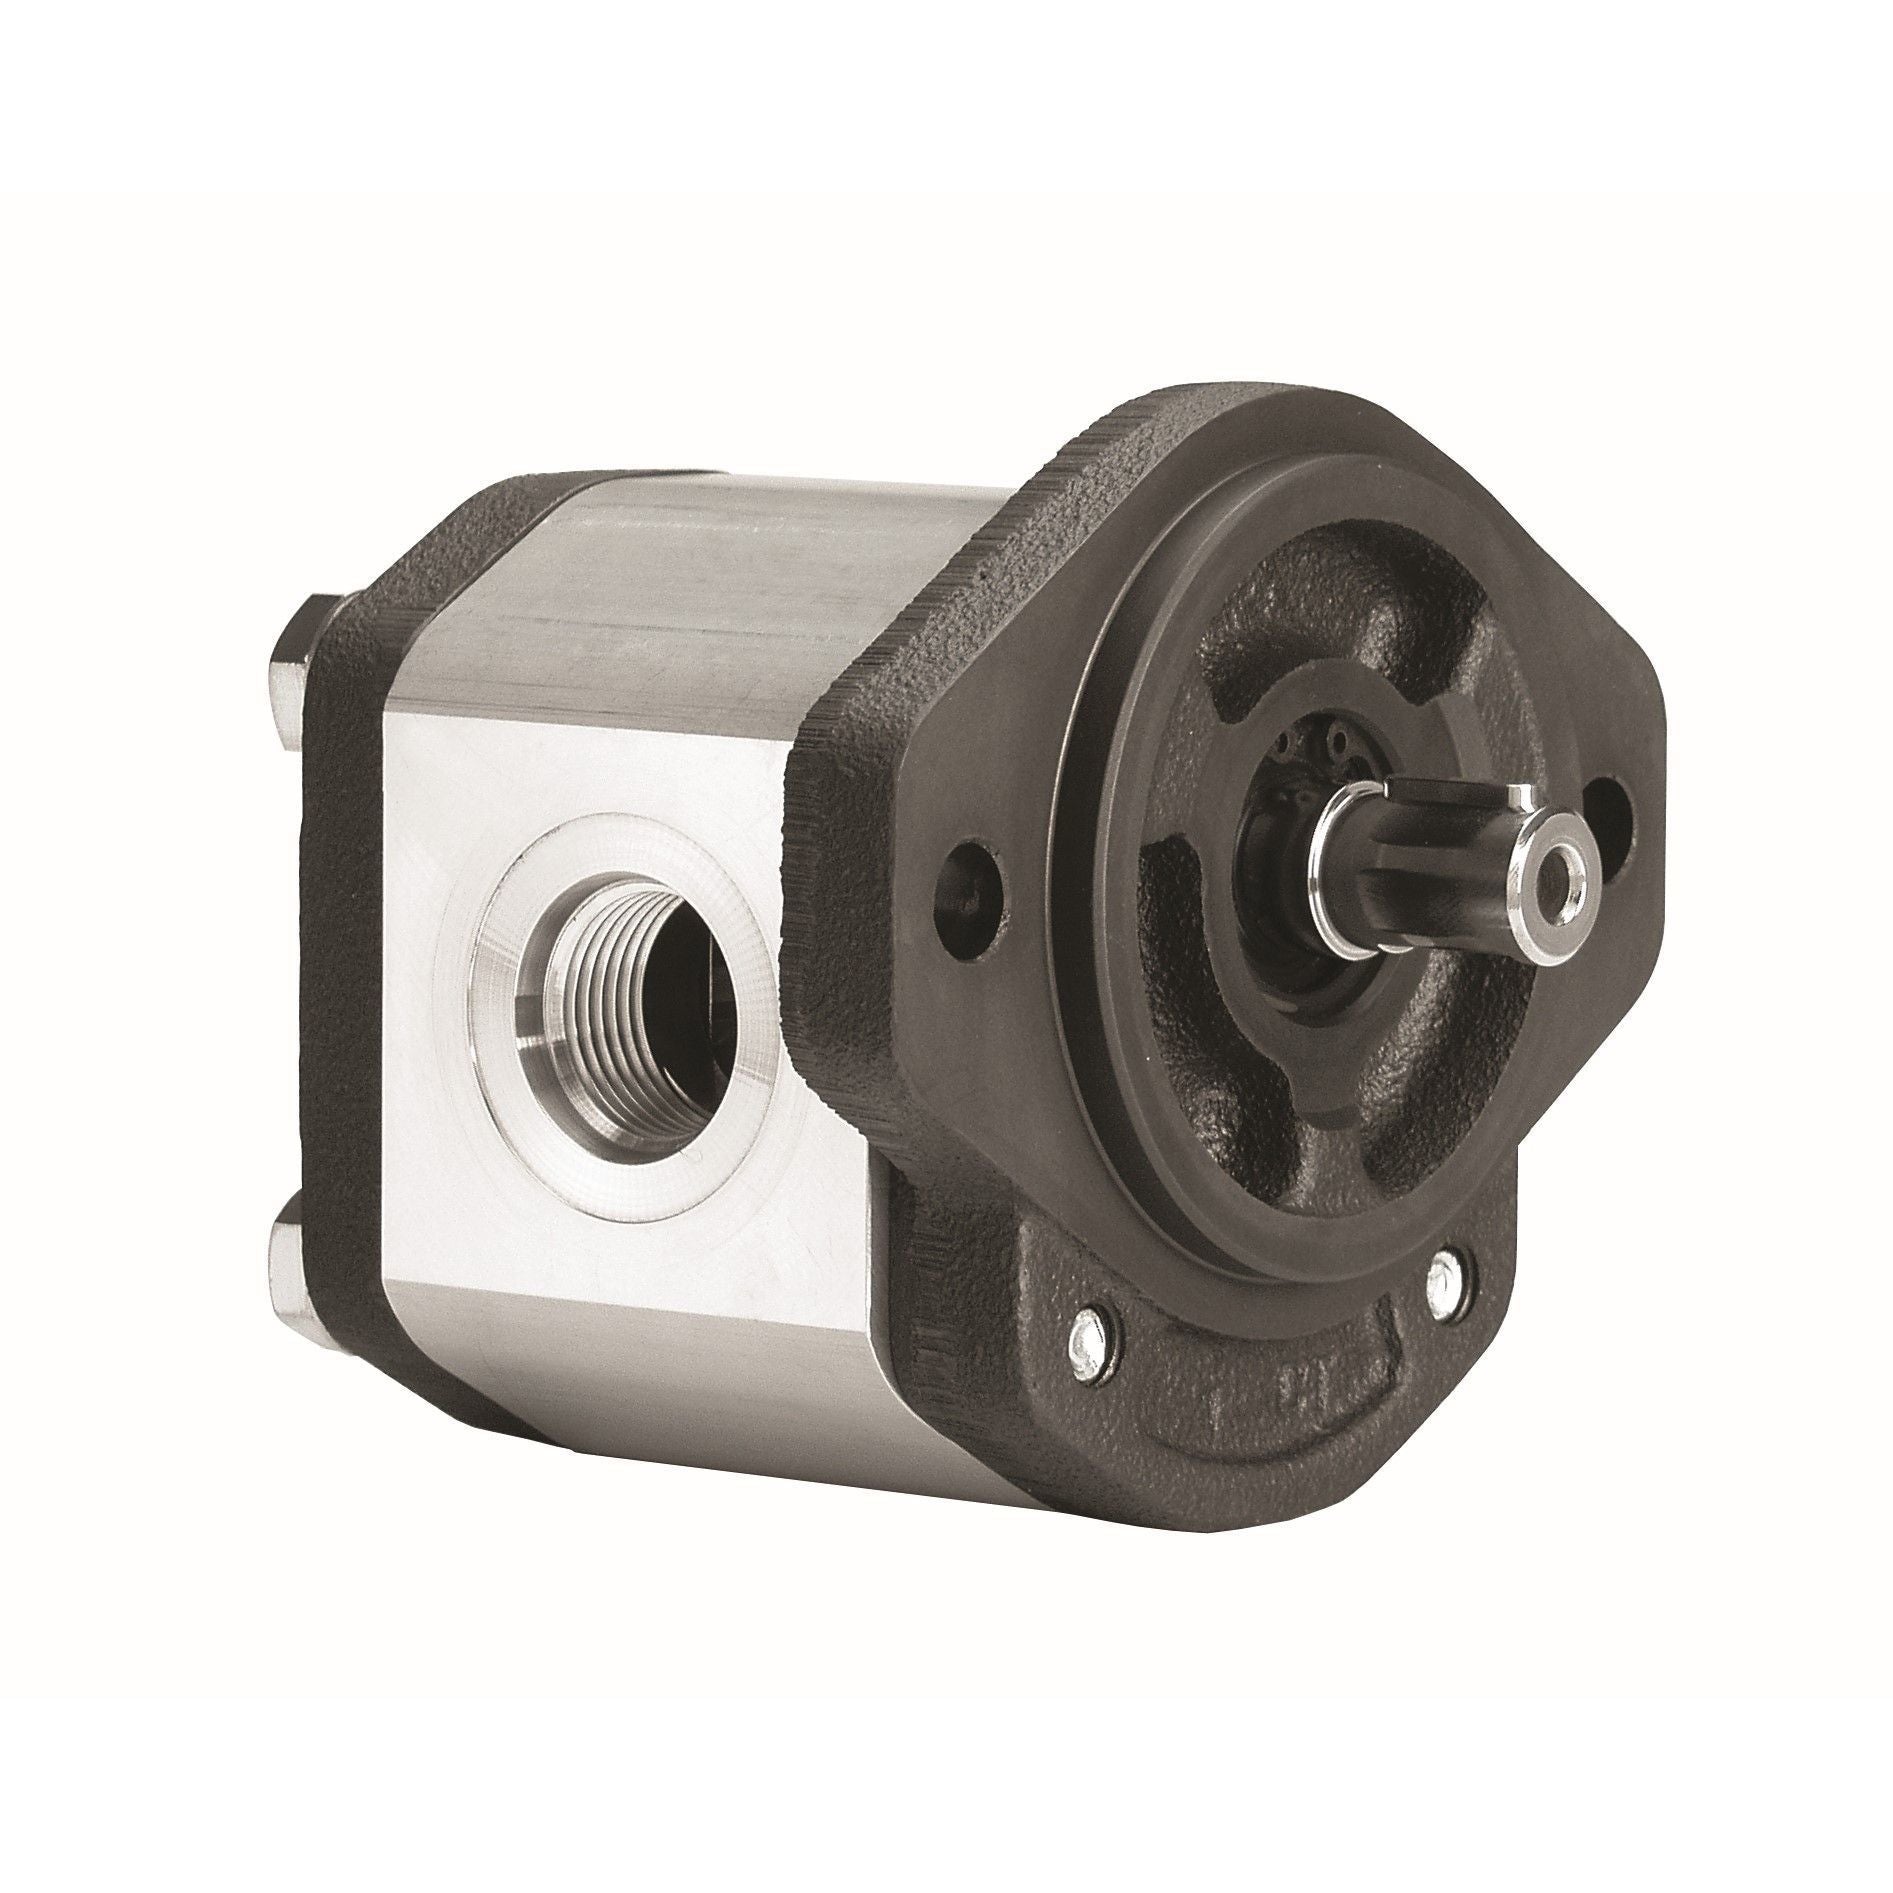 GHP1A-D-6 : Marzocchi Gear Pump, CW, 4.1cc (0.2501in3), 1.95 GPM, 3915psi, 4000 RPM, #8 SAE (1/2") In, #6 SAE (3/8") Out, Keyed Shaft 1/2" Bore x 1/8" Key, SAE AA 2-Bolt Mount